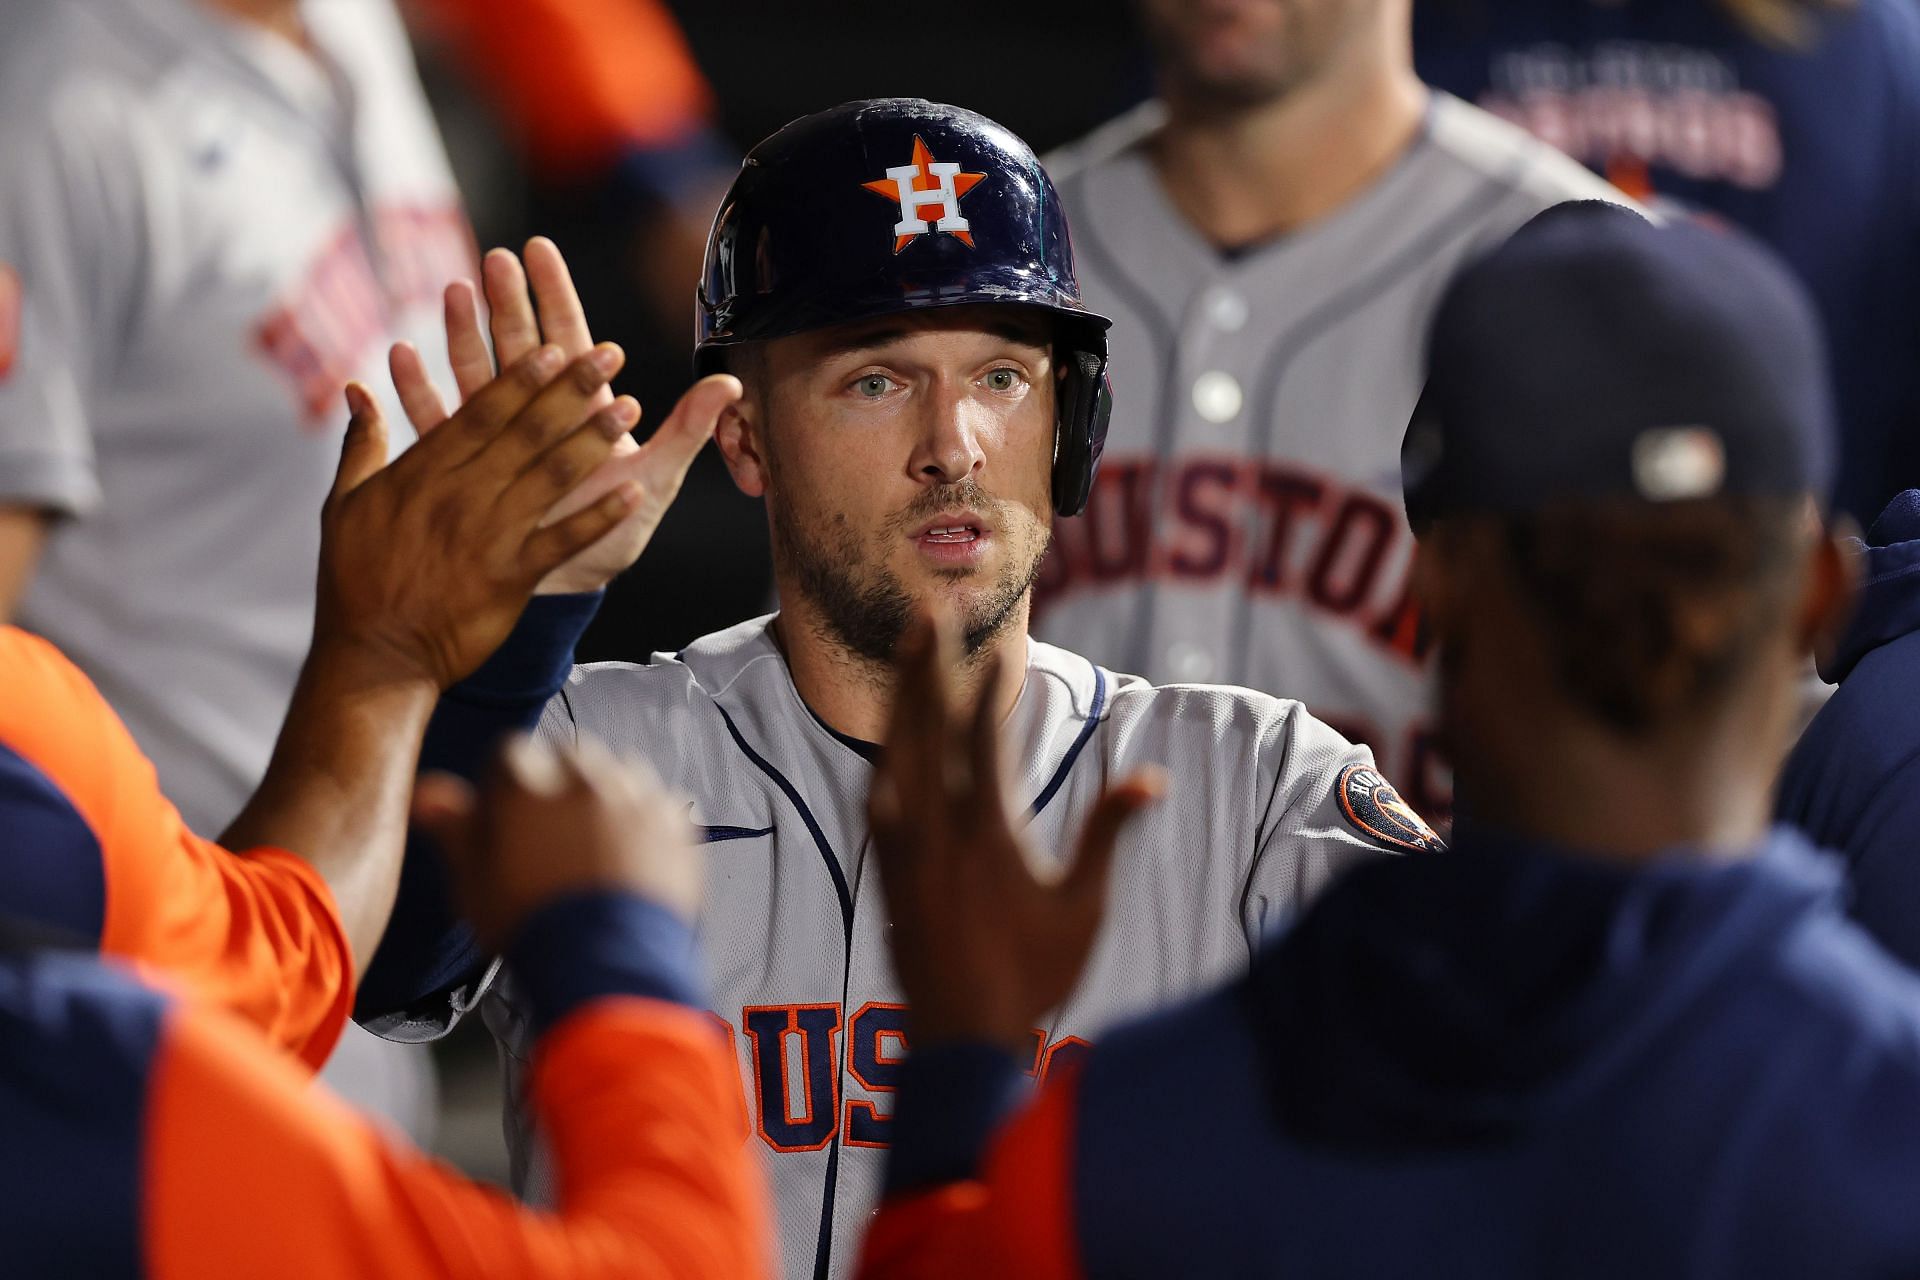 Alex Bregman celebrates with teammates in the dugout after scoring a run during last night&#039;s Houston Astros v Chicago White Sox game in Chicago, Illinois.